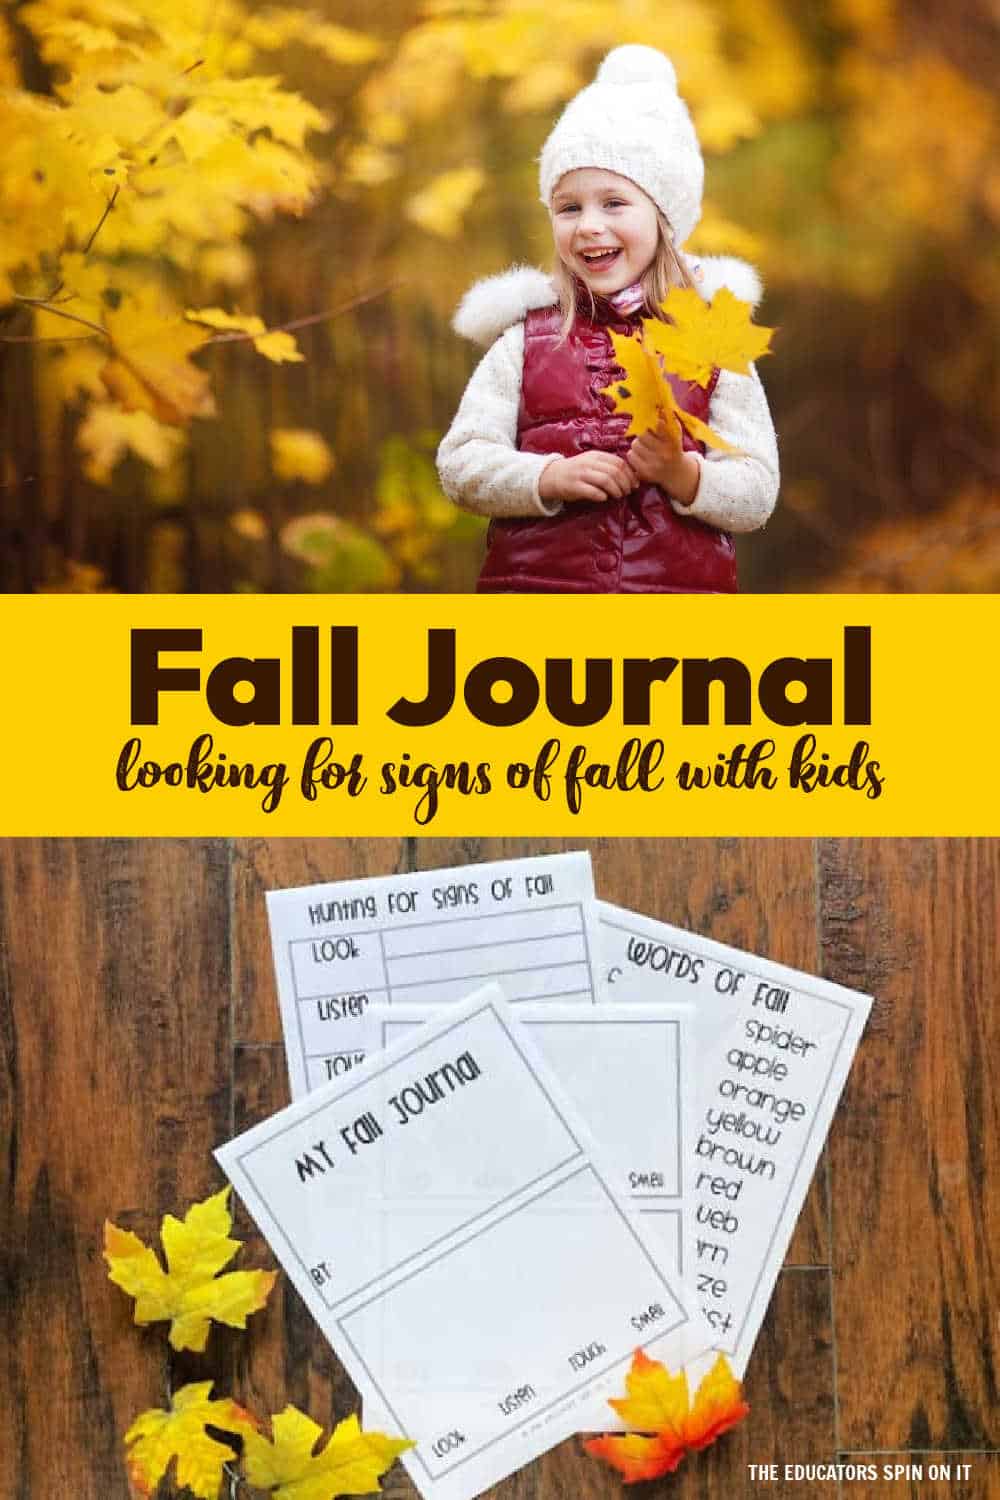 How to Make A DIY Nature Journal for Kids - Happy Toddler Playtime